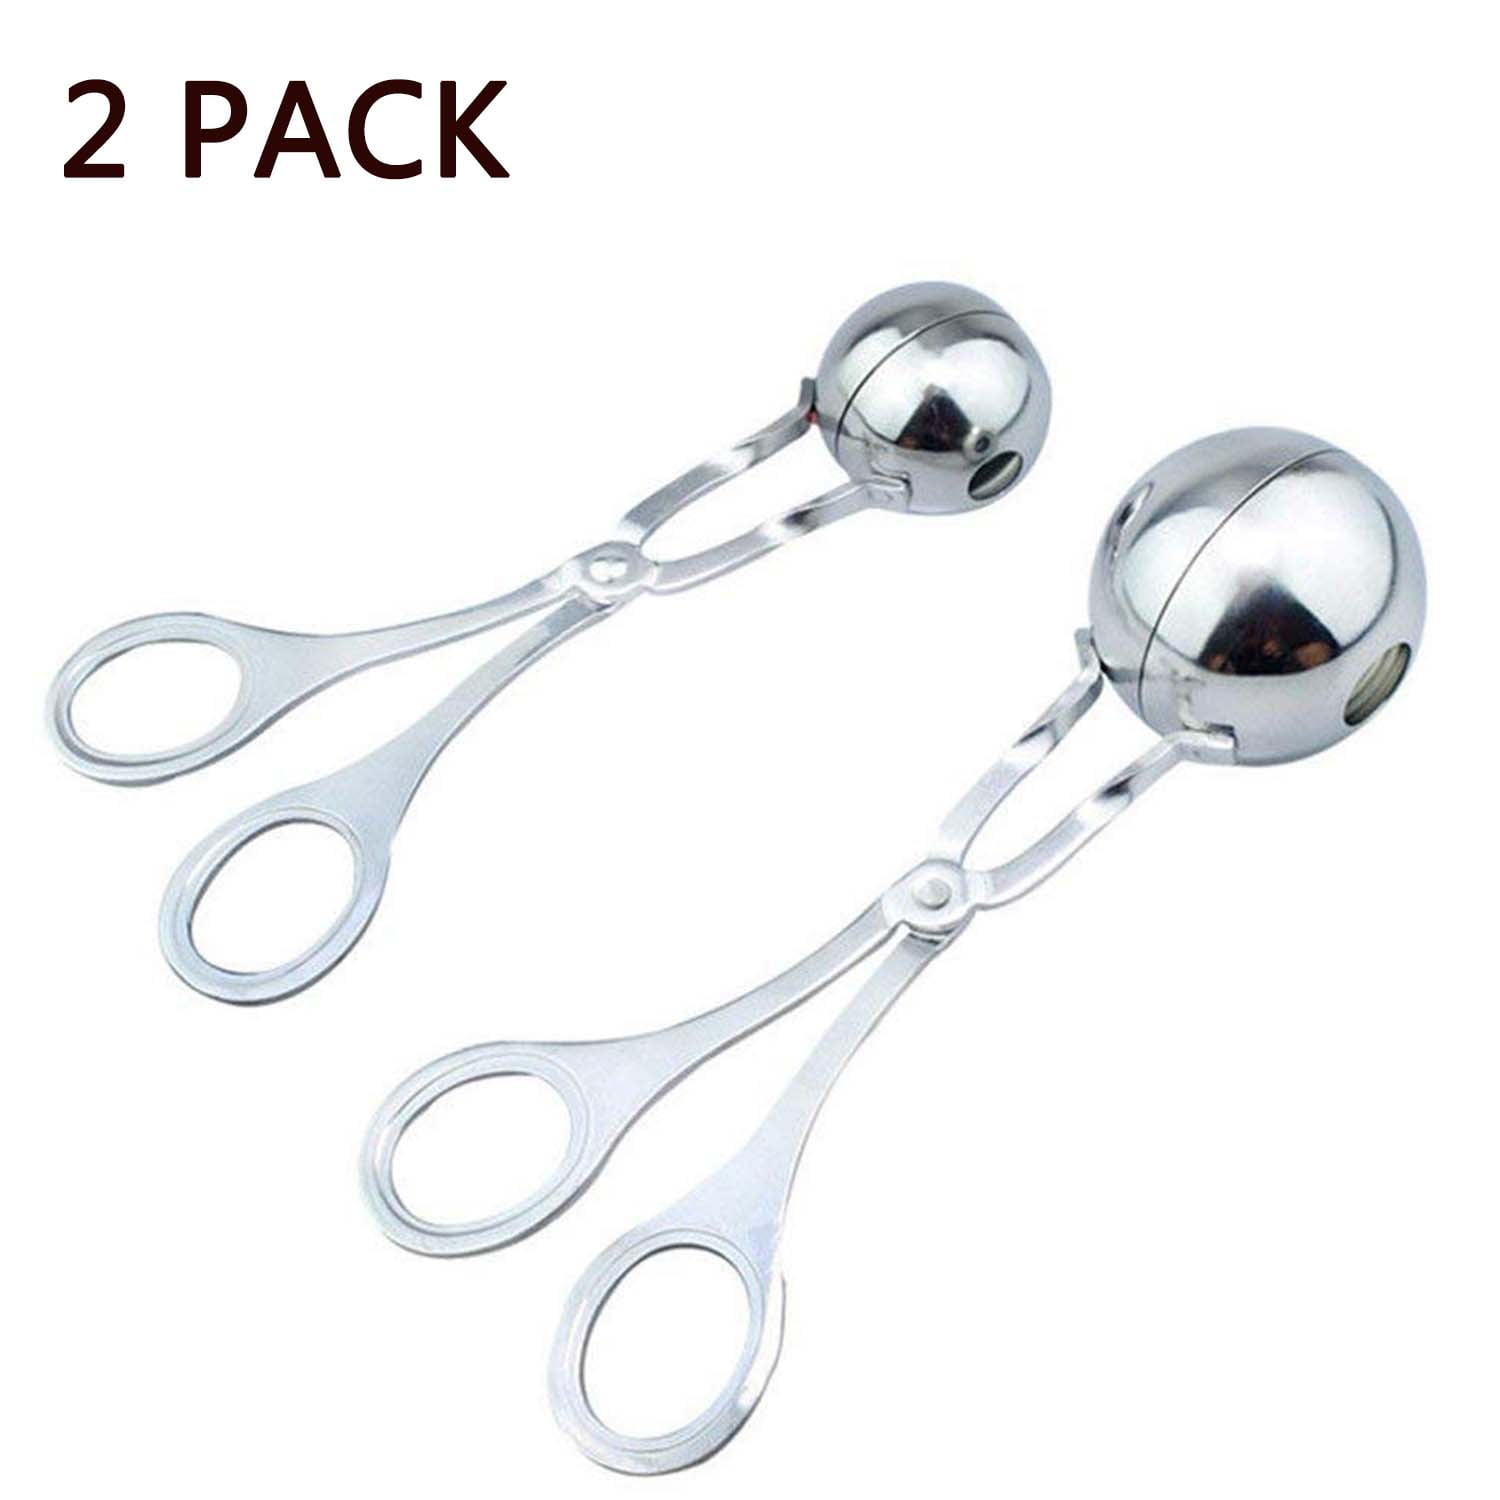 Cake Pop... 2 PCS None-Stick Meat Ballers Stainless Steel Baller Tongs 